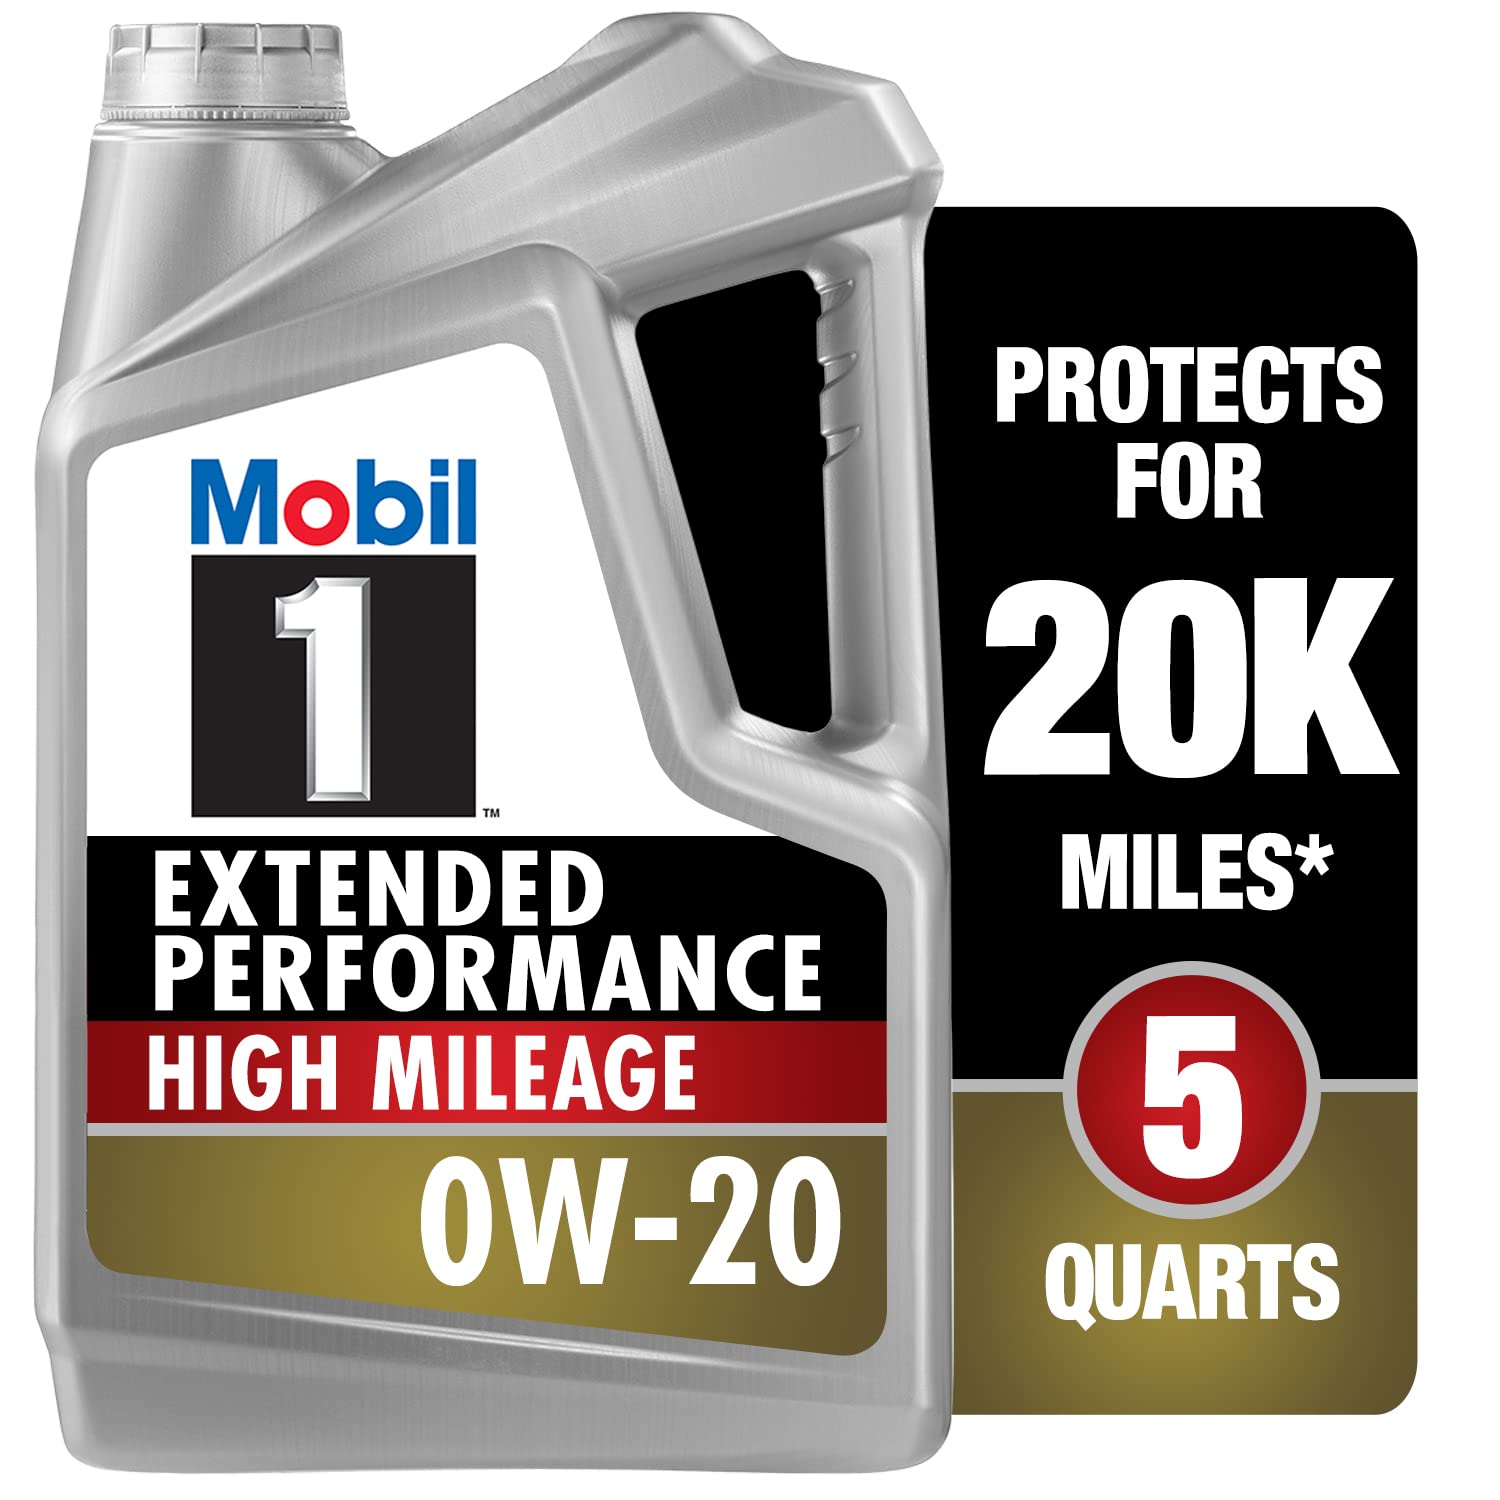 Mobil 1 High Mileage vs Extended Performance: In-Depth Oil Comparison